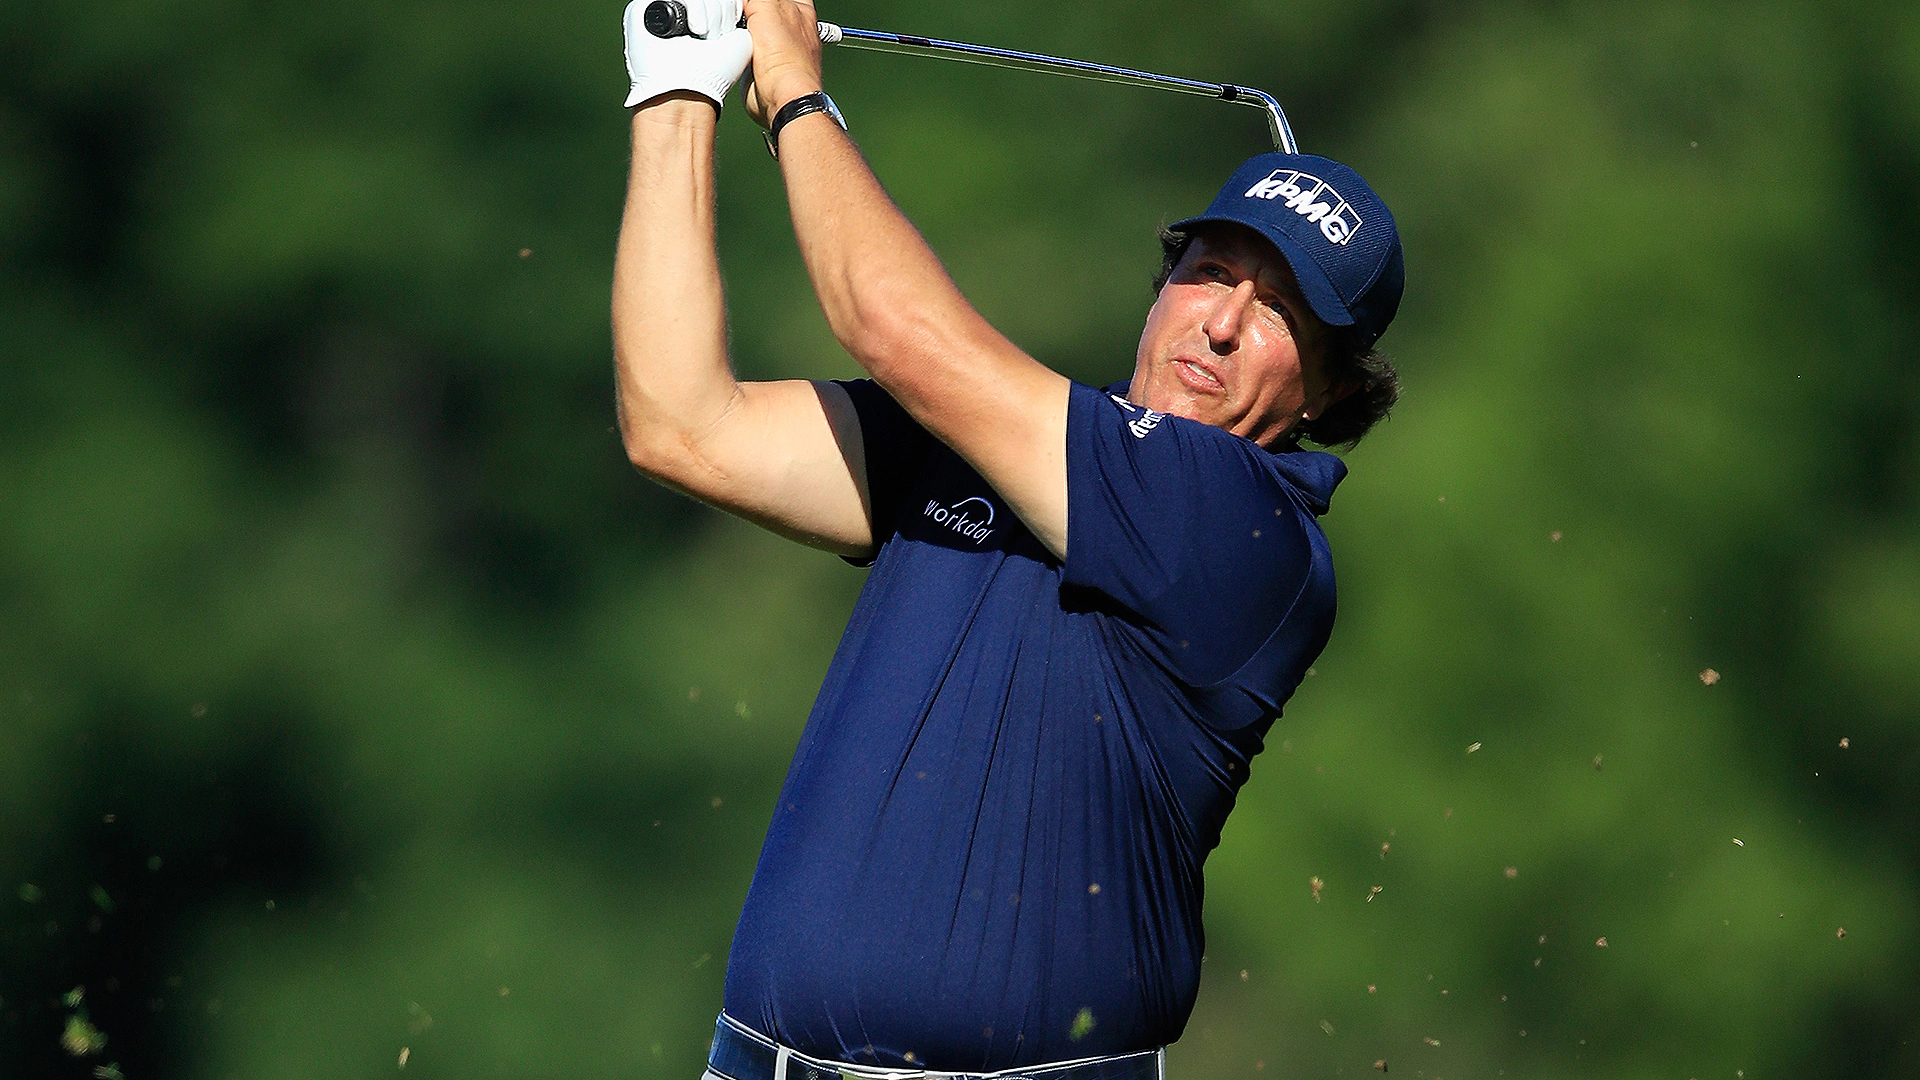 Mickelson heads to U.S. Open after closing 65